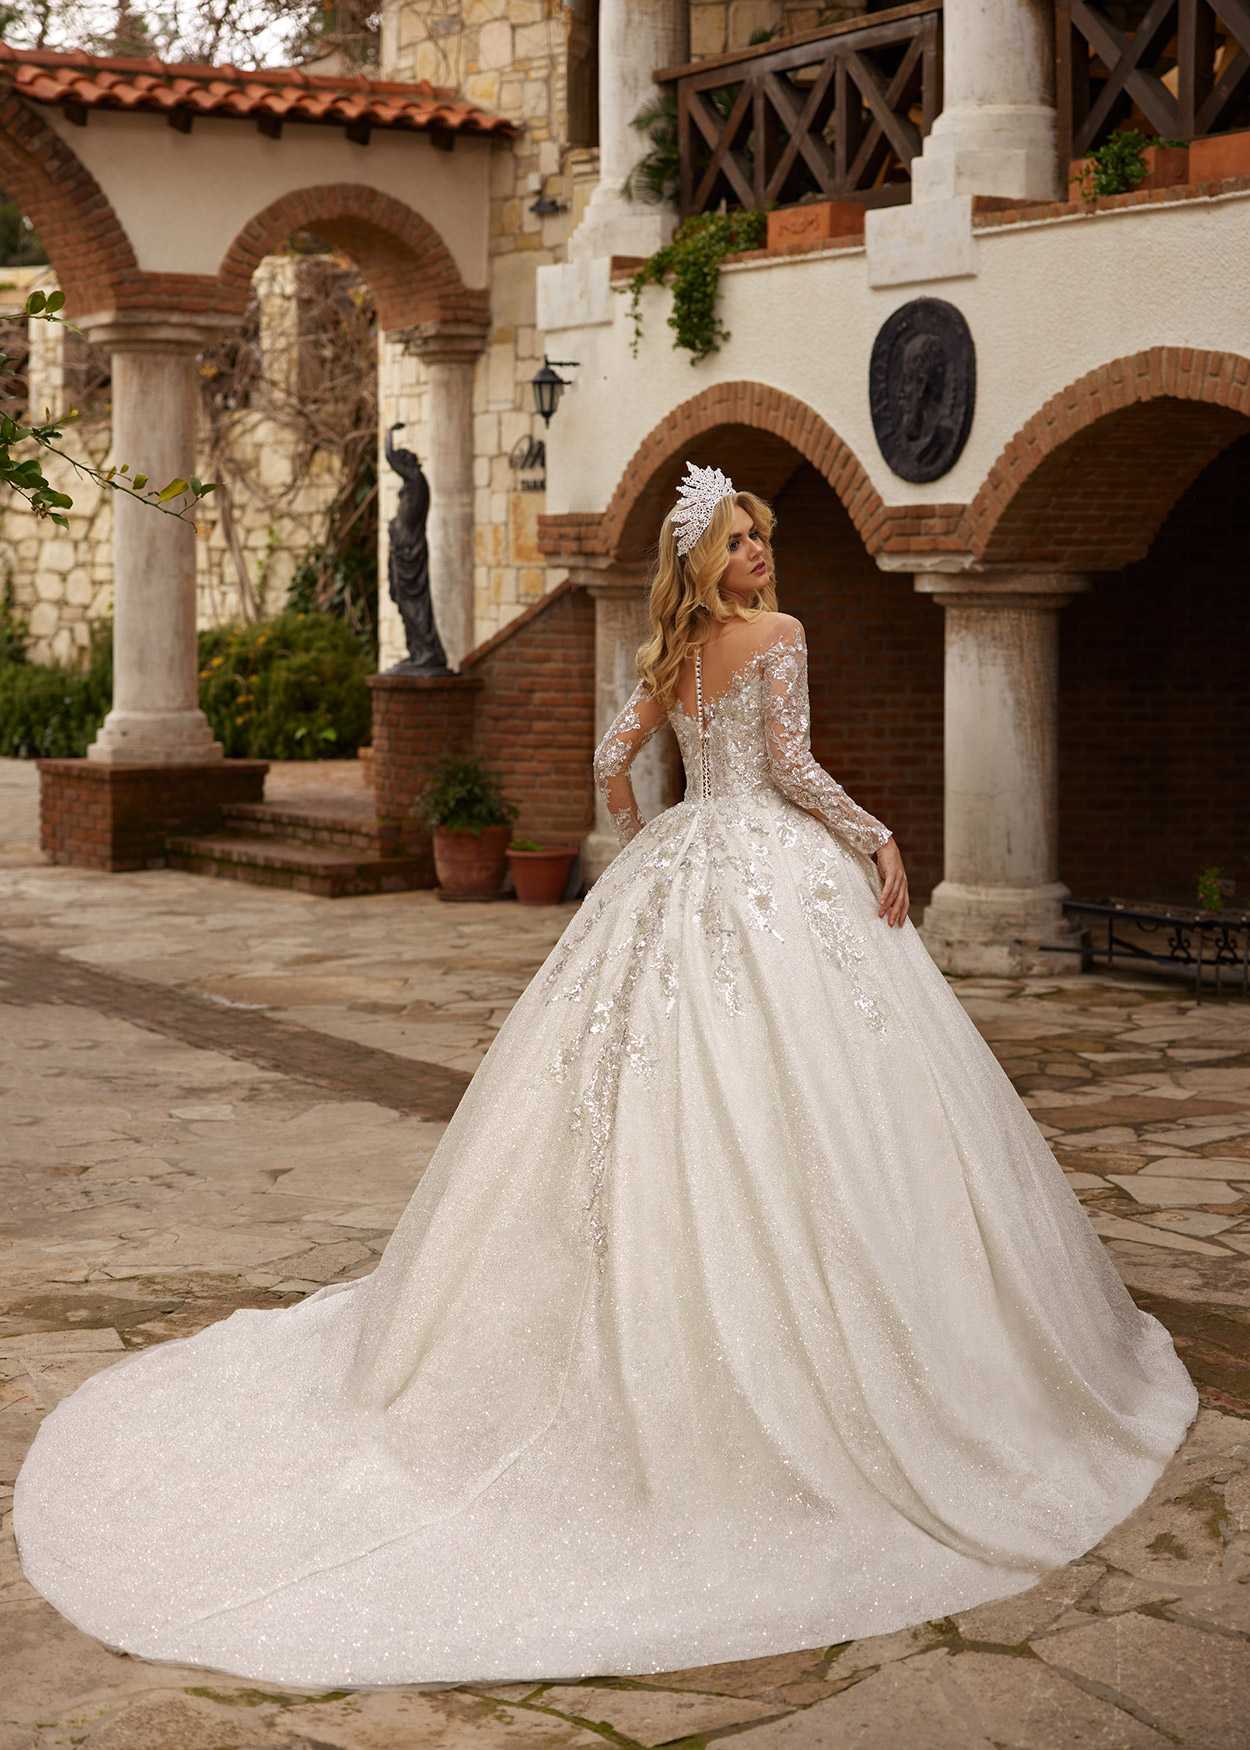 buy affordable Illusion Neckline Sequined Embellished Lace Ball Gown Wedding Dress with Illusion Sleeves royal train sparkle online wedding gowns